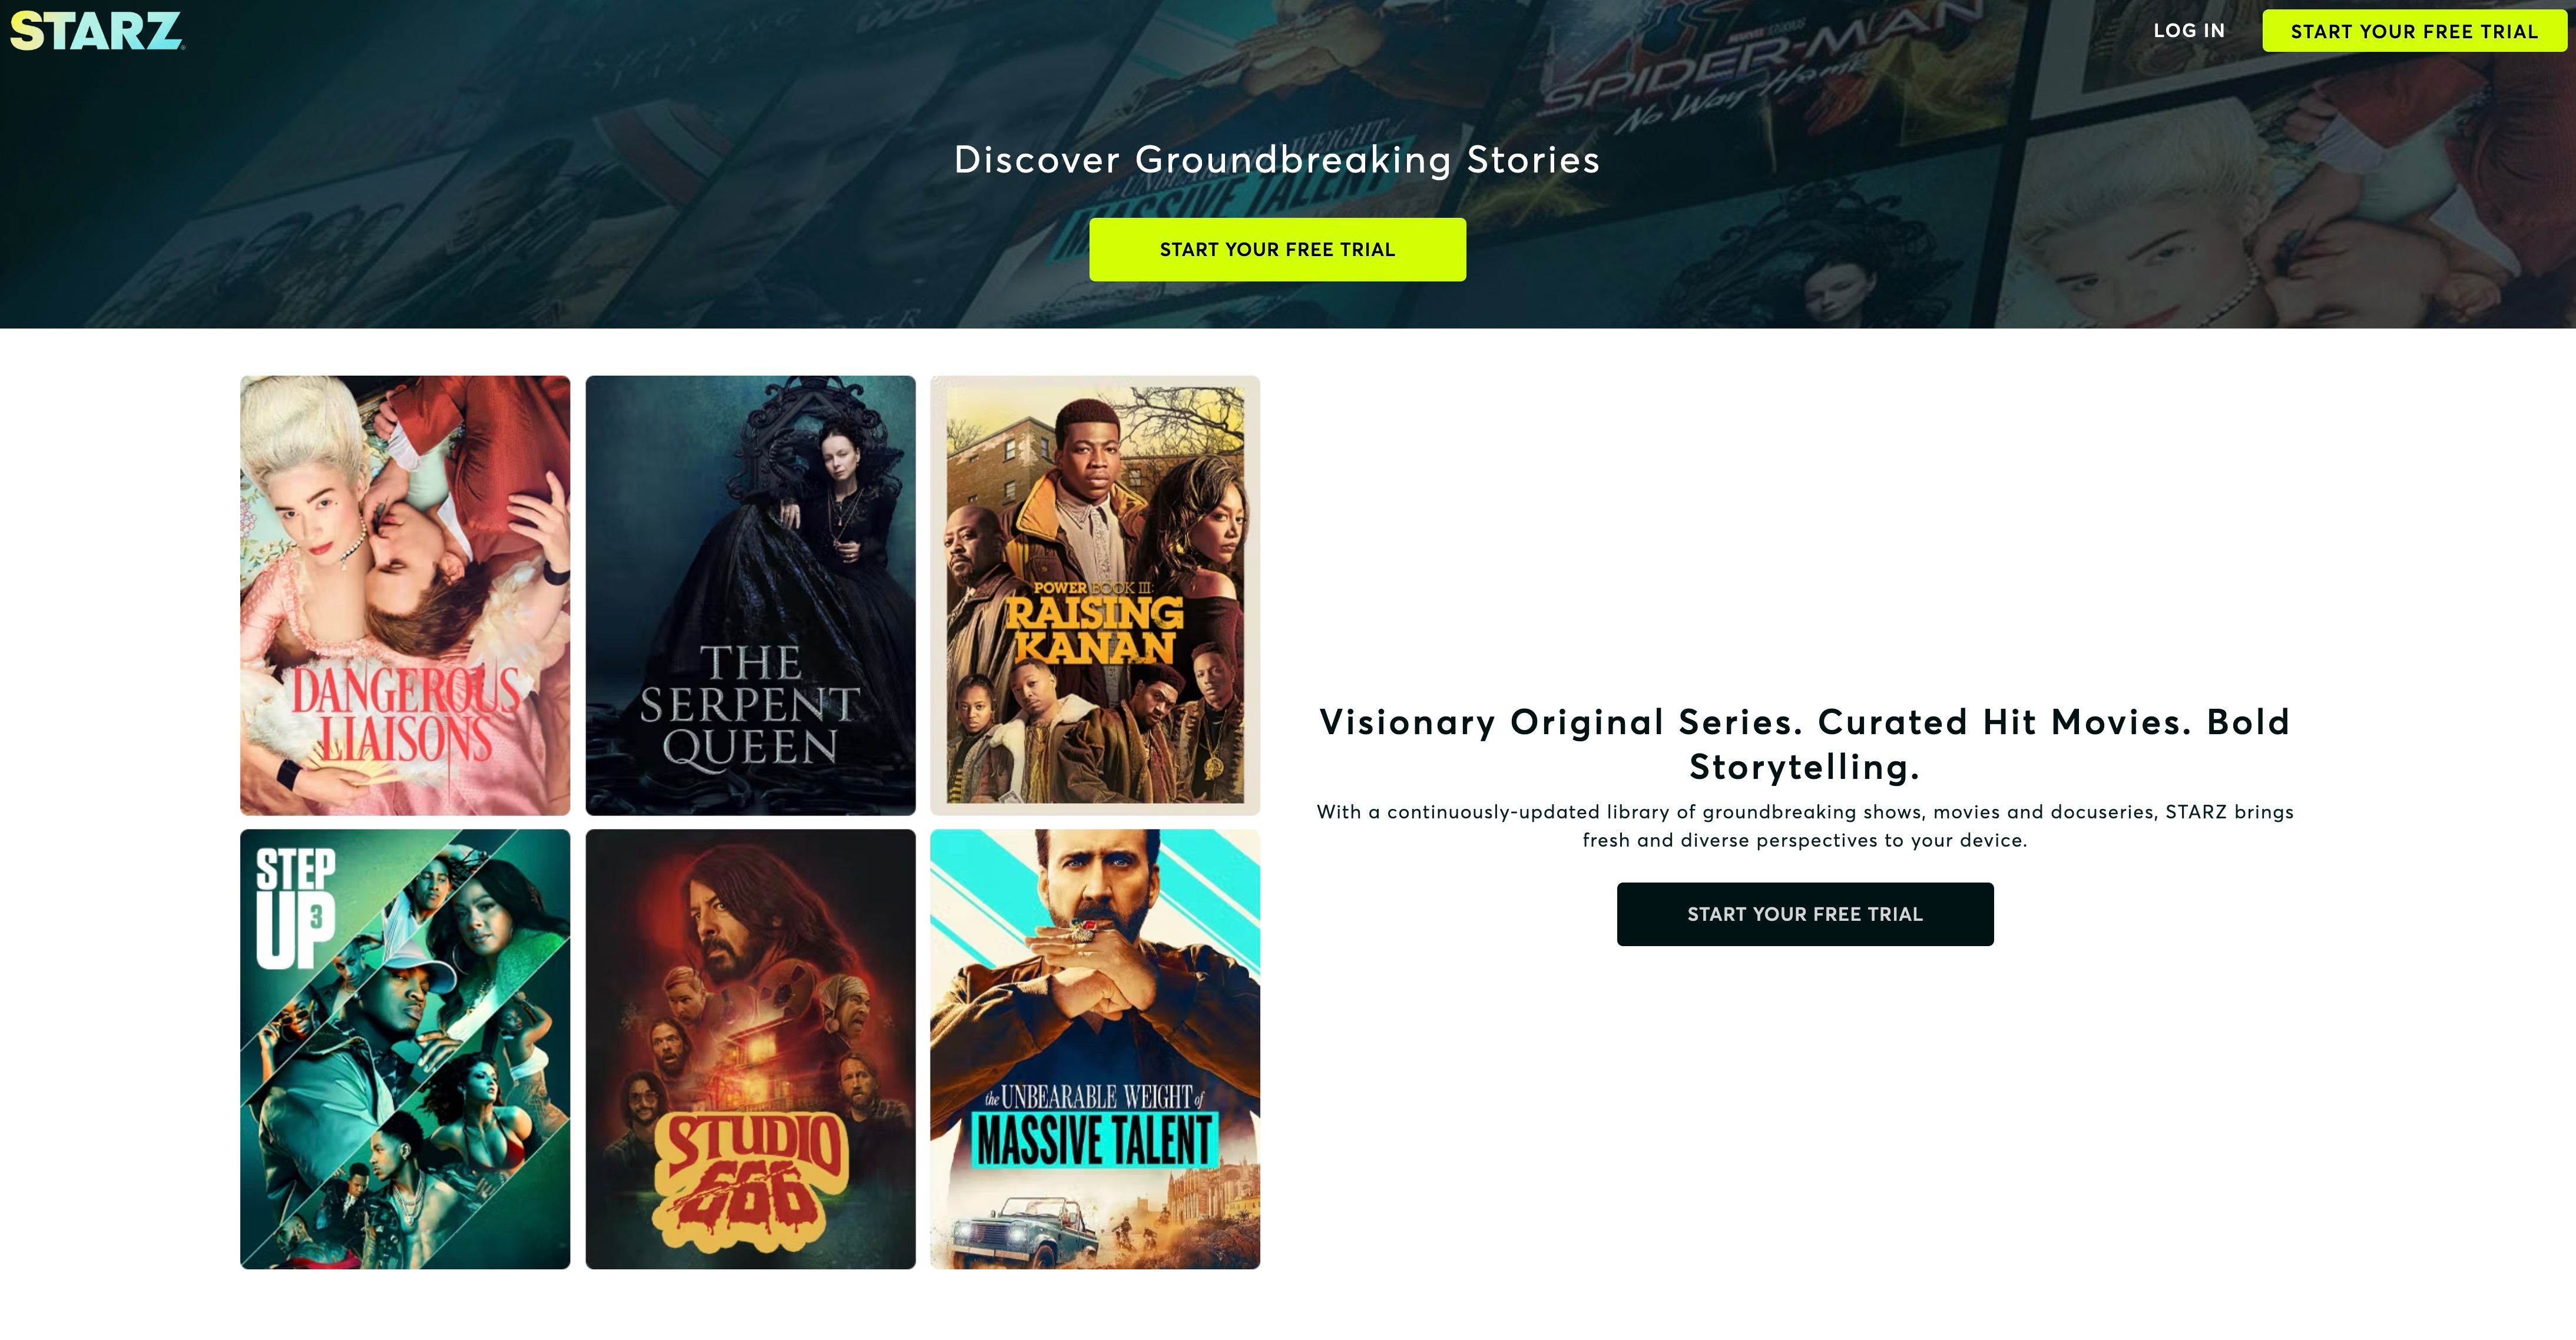 Starz Start Free Trail page with Start Your Free Trial button. 